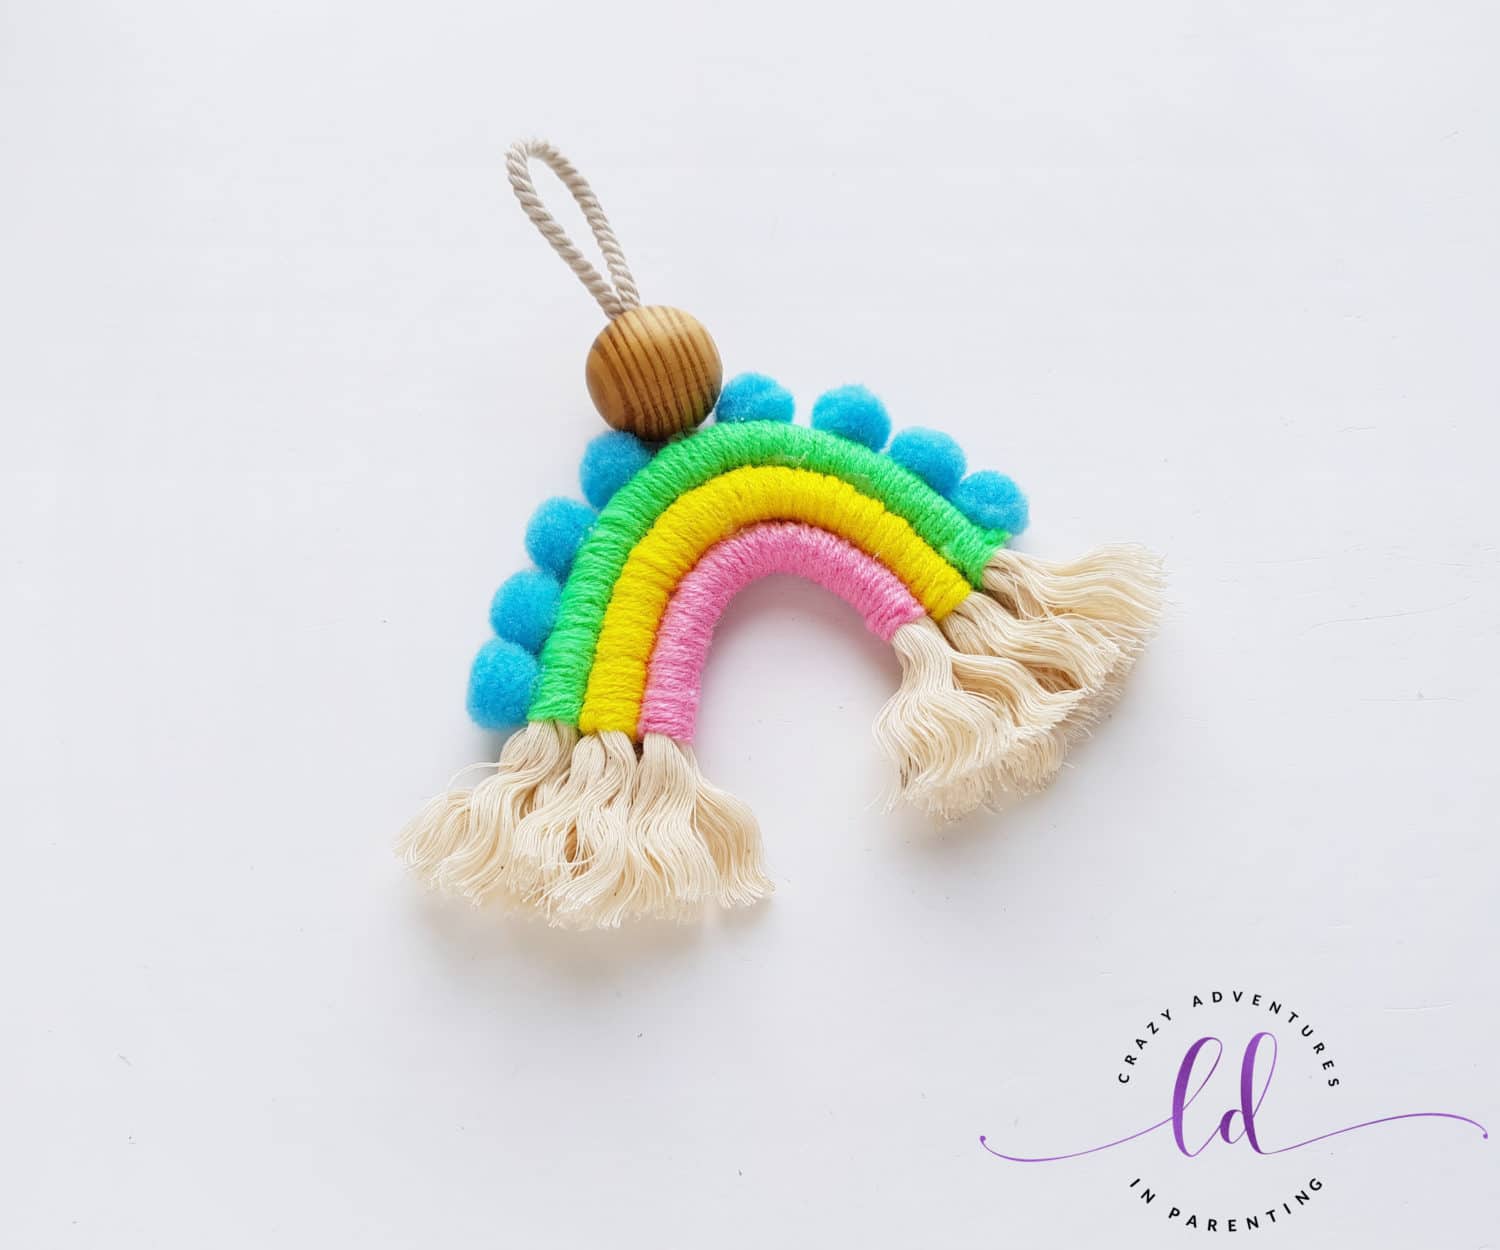 Attach PomPoms and Fray Rope to Make a Macrame Rainbow Charm